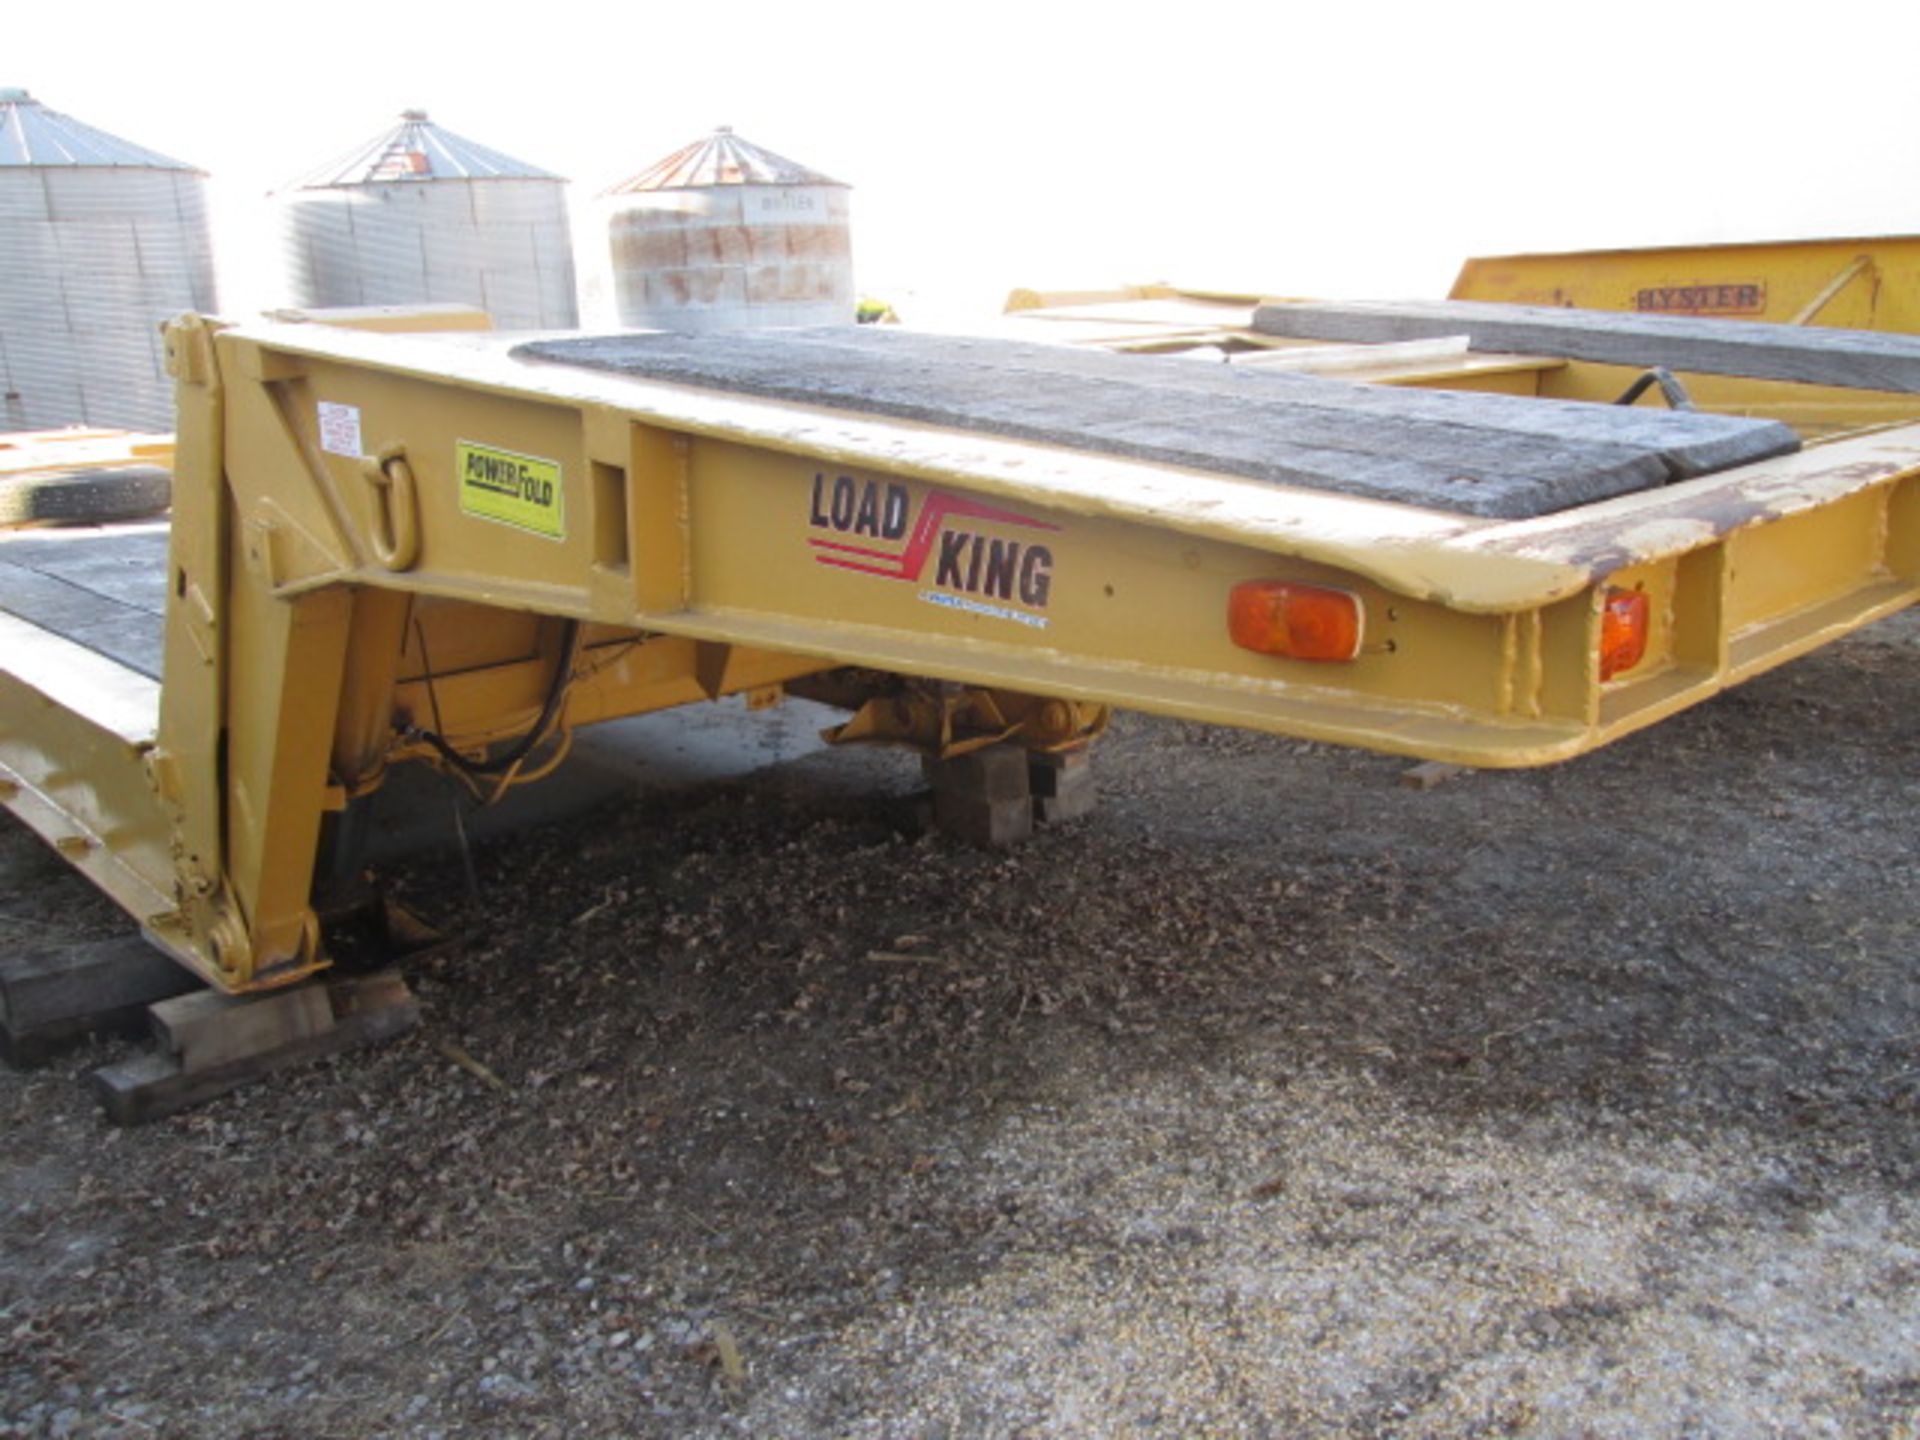 1968 LOADKING POWER FOLD DOWN FRONT DECK INDUSTRIAL TRAILER, TRI-AXLE, 43’, 20’ WELL - Image 14 of 15